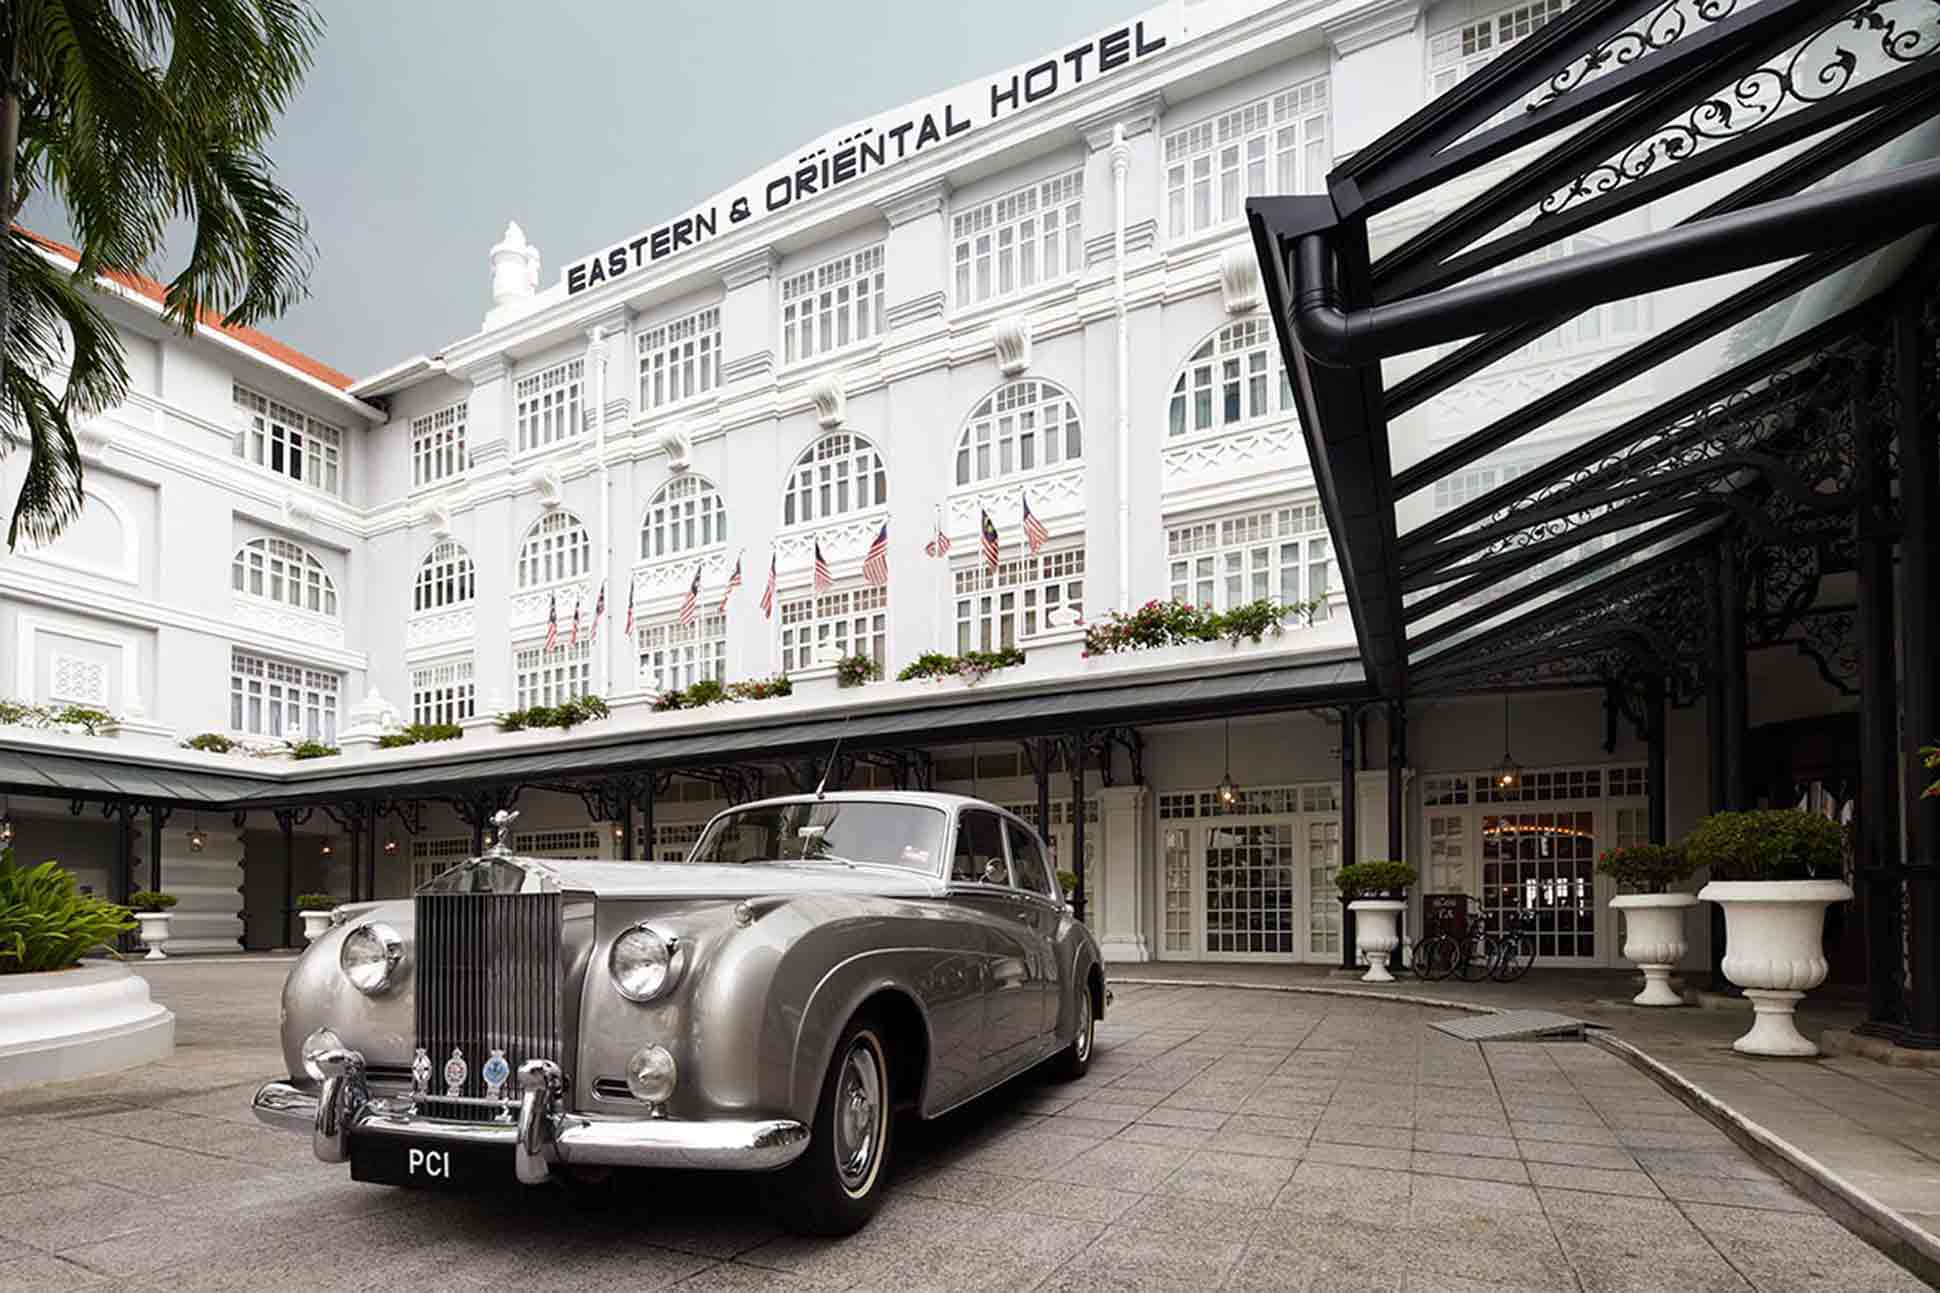 Exterior of Eastern and Oriental Hotel, Penang